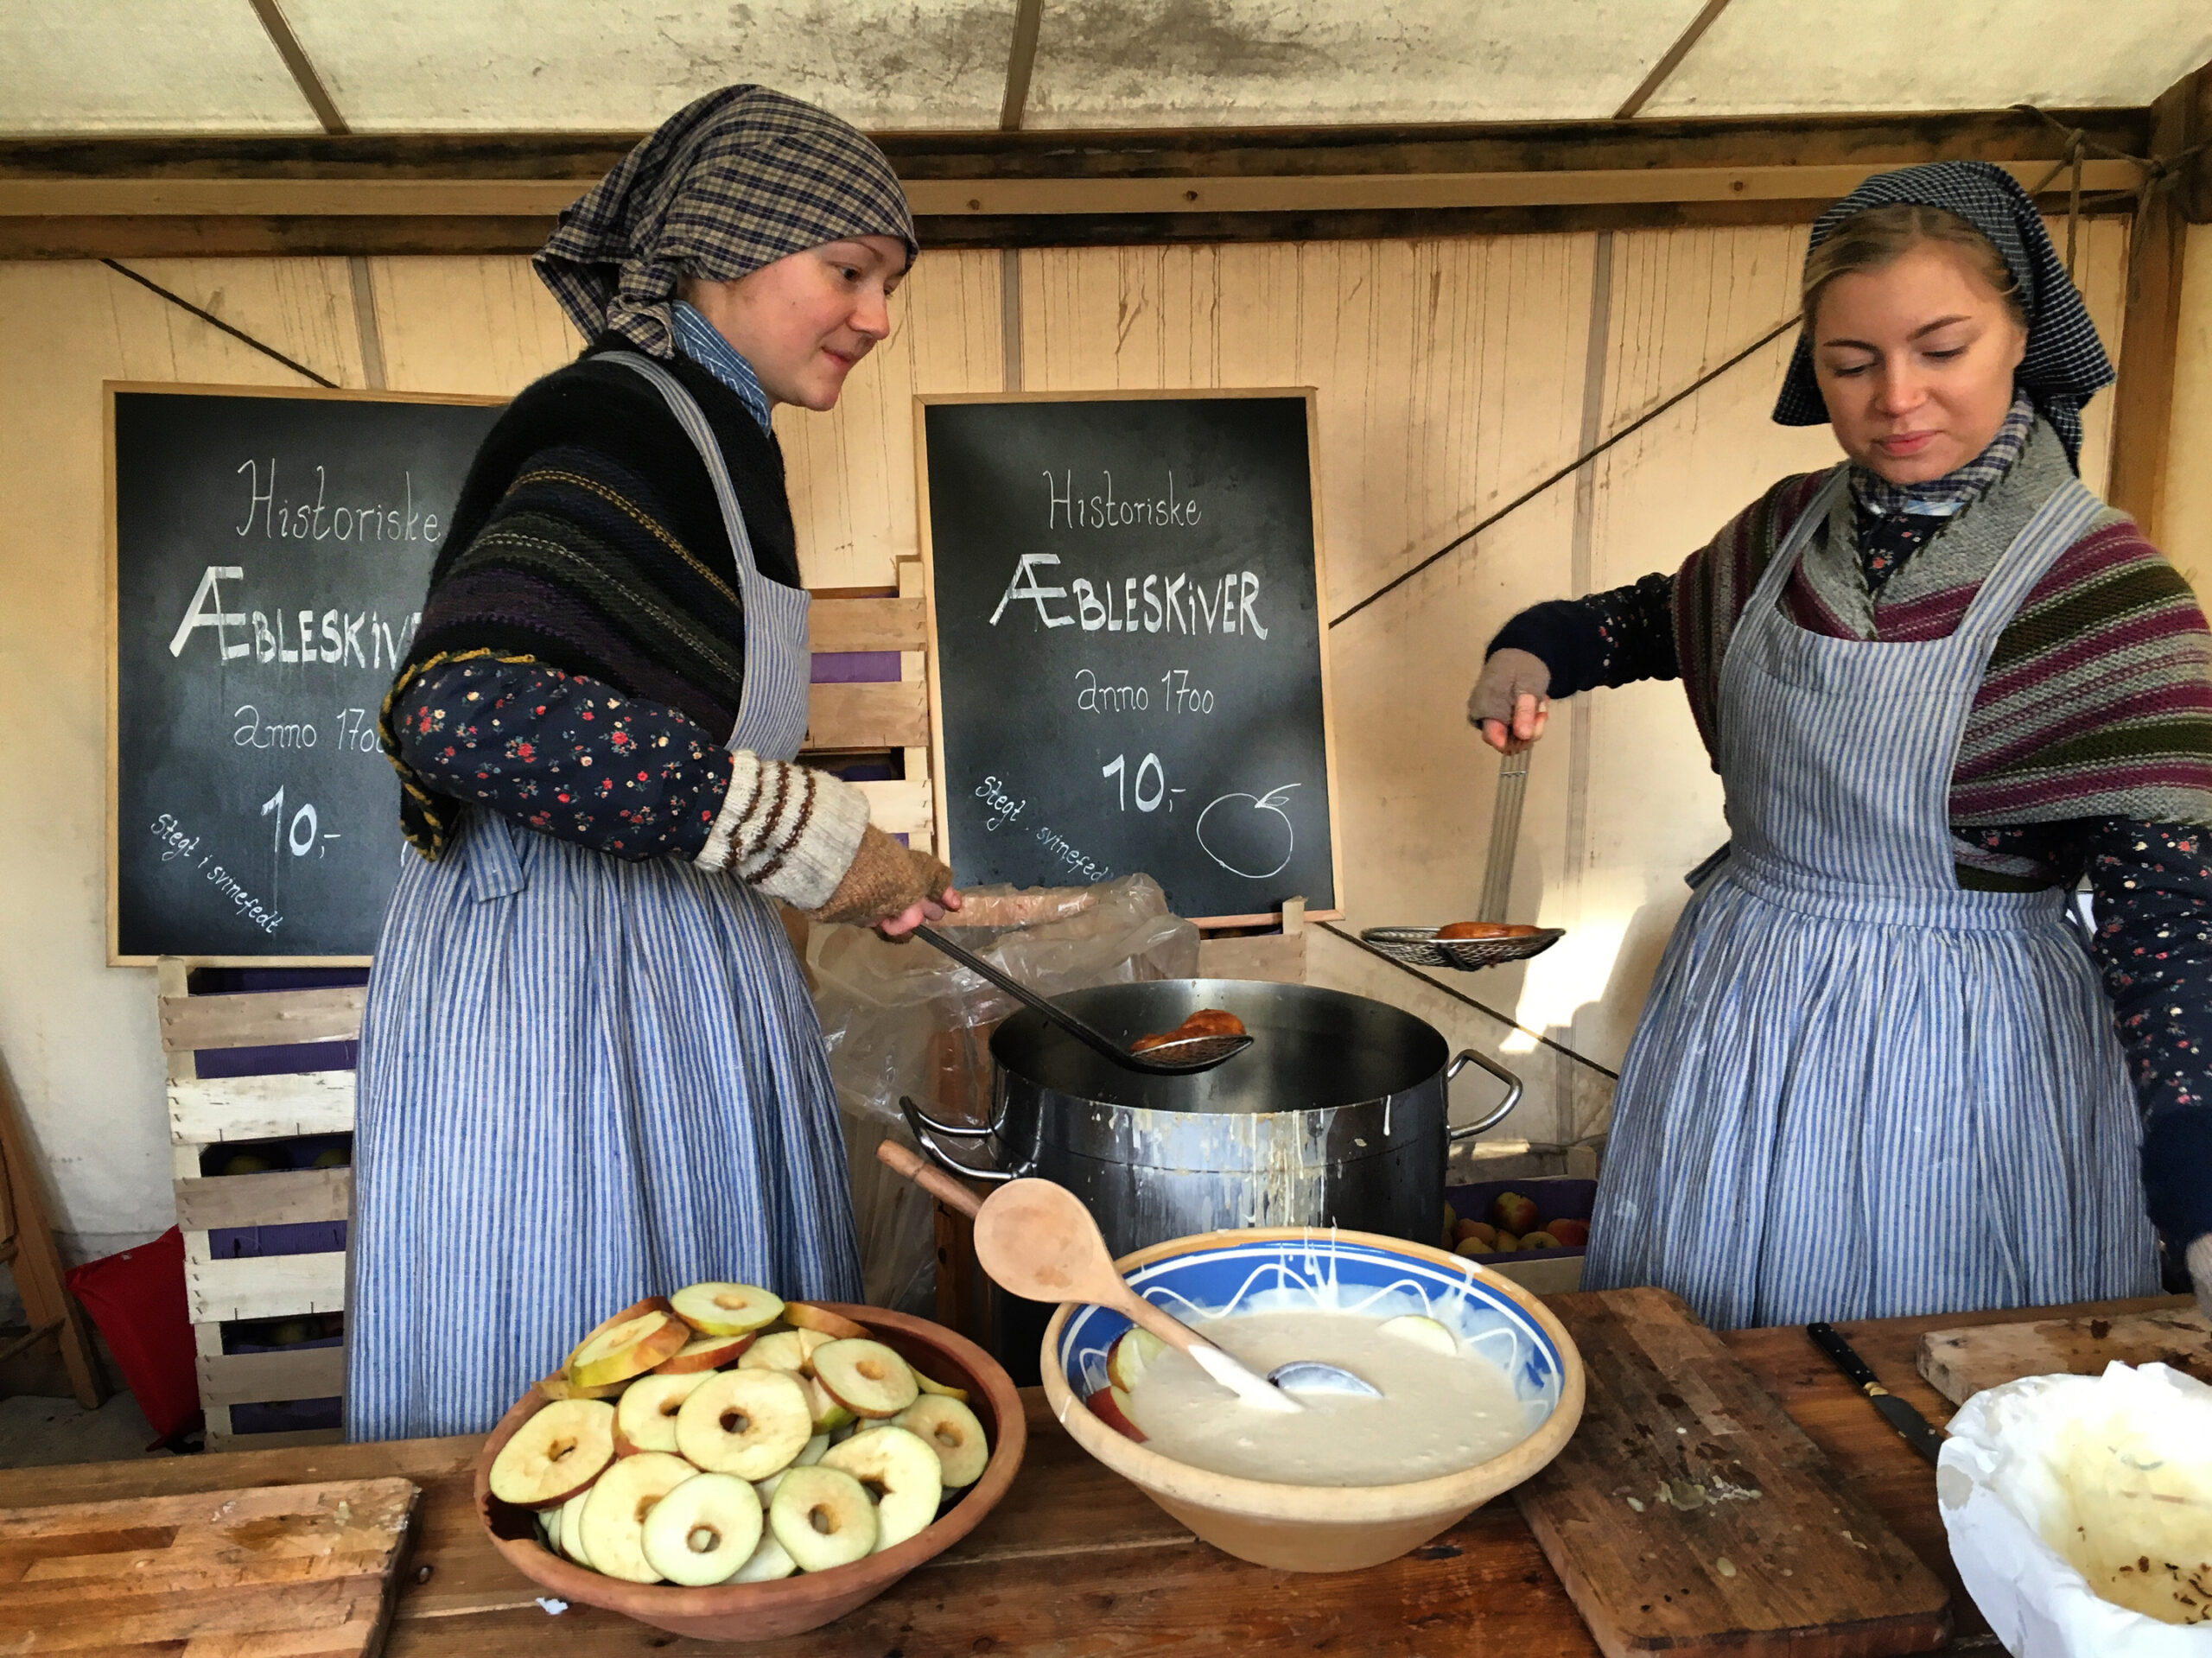 Danish women make Ableskiver, a traditional apple donut made at Christmas time in Den Gamle By, an open-air museum in Aarhus, Denmark.